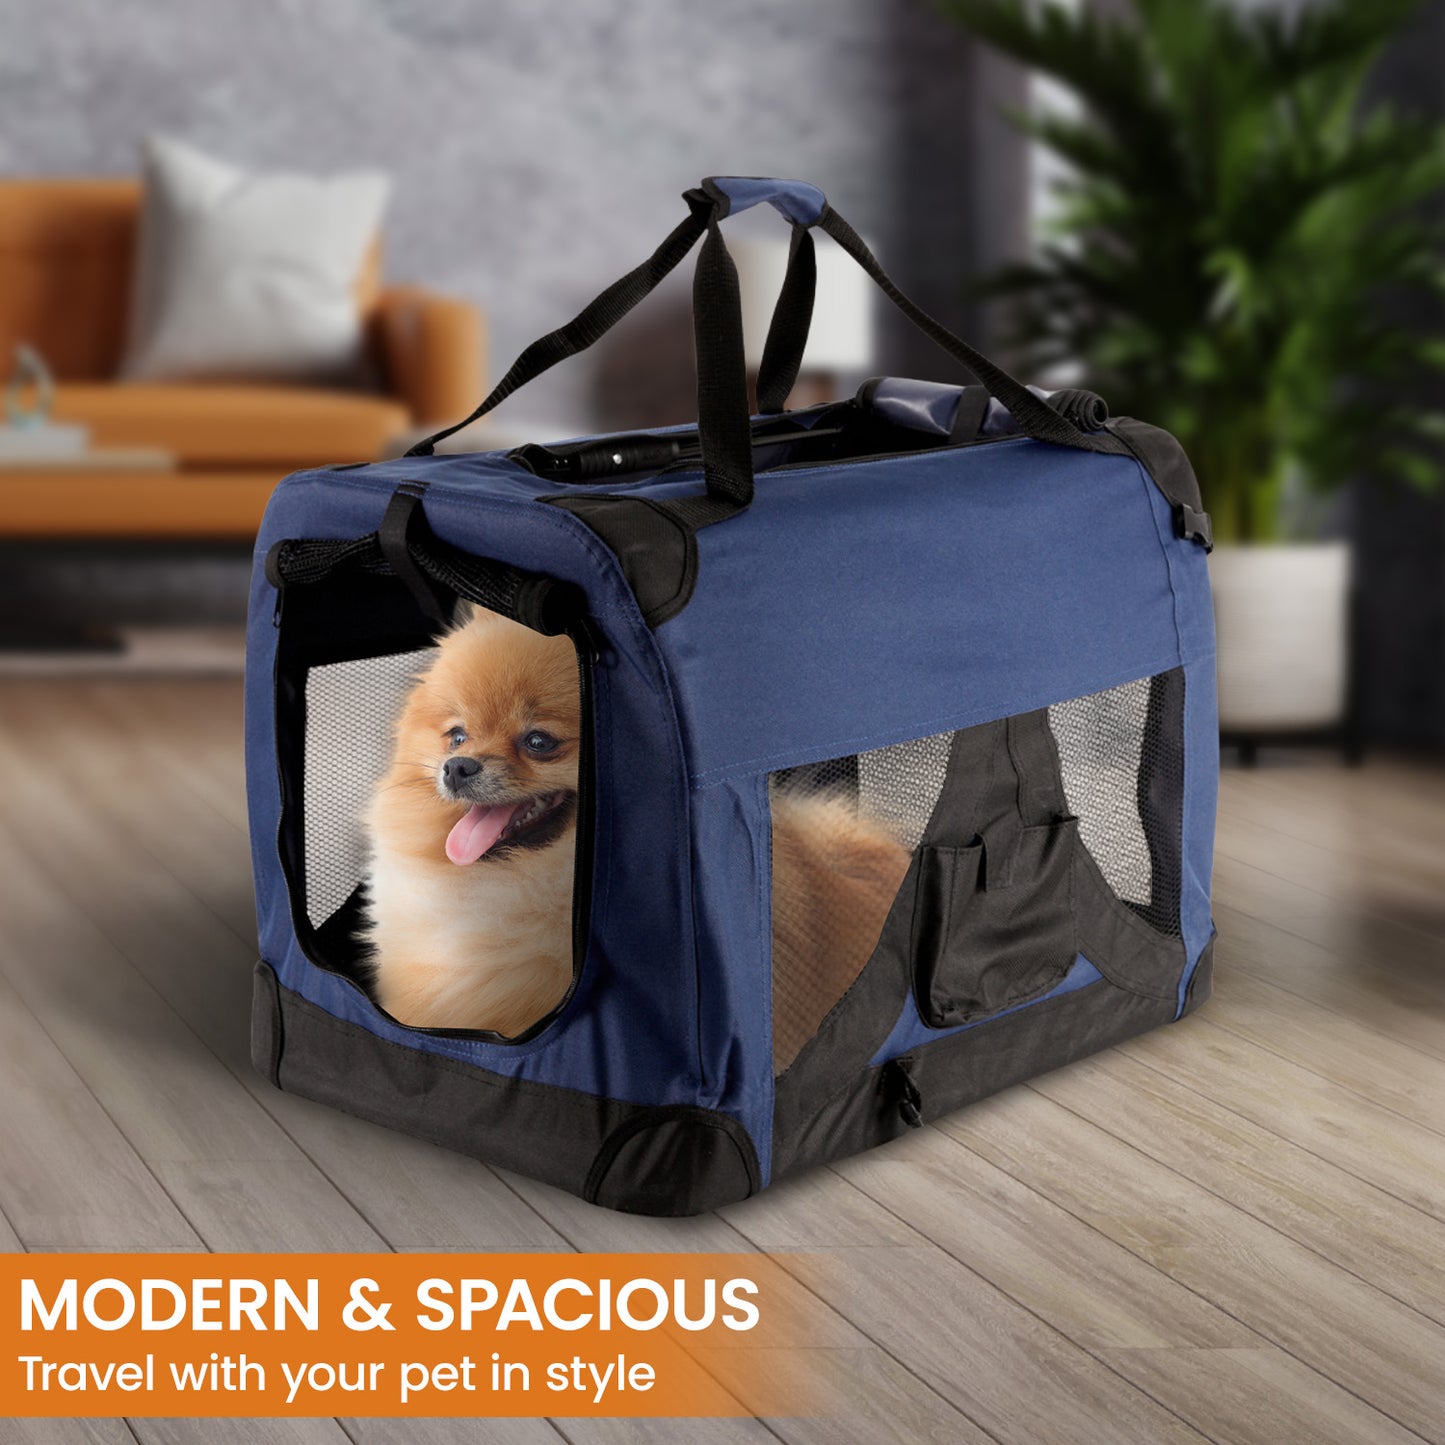 Royale Heavy Duty Soft Collapsible Pet Carrier Travel Friendly Medium